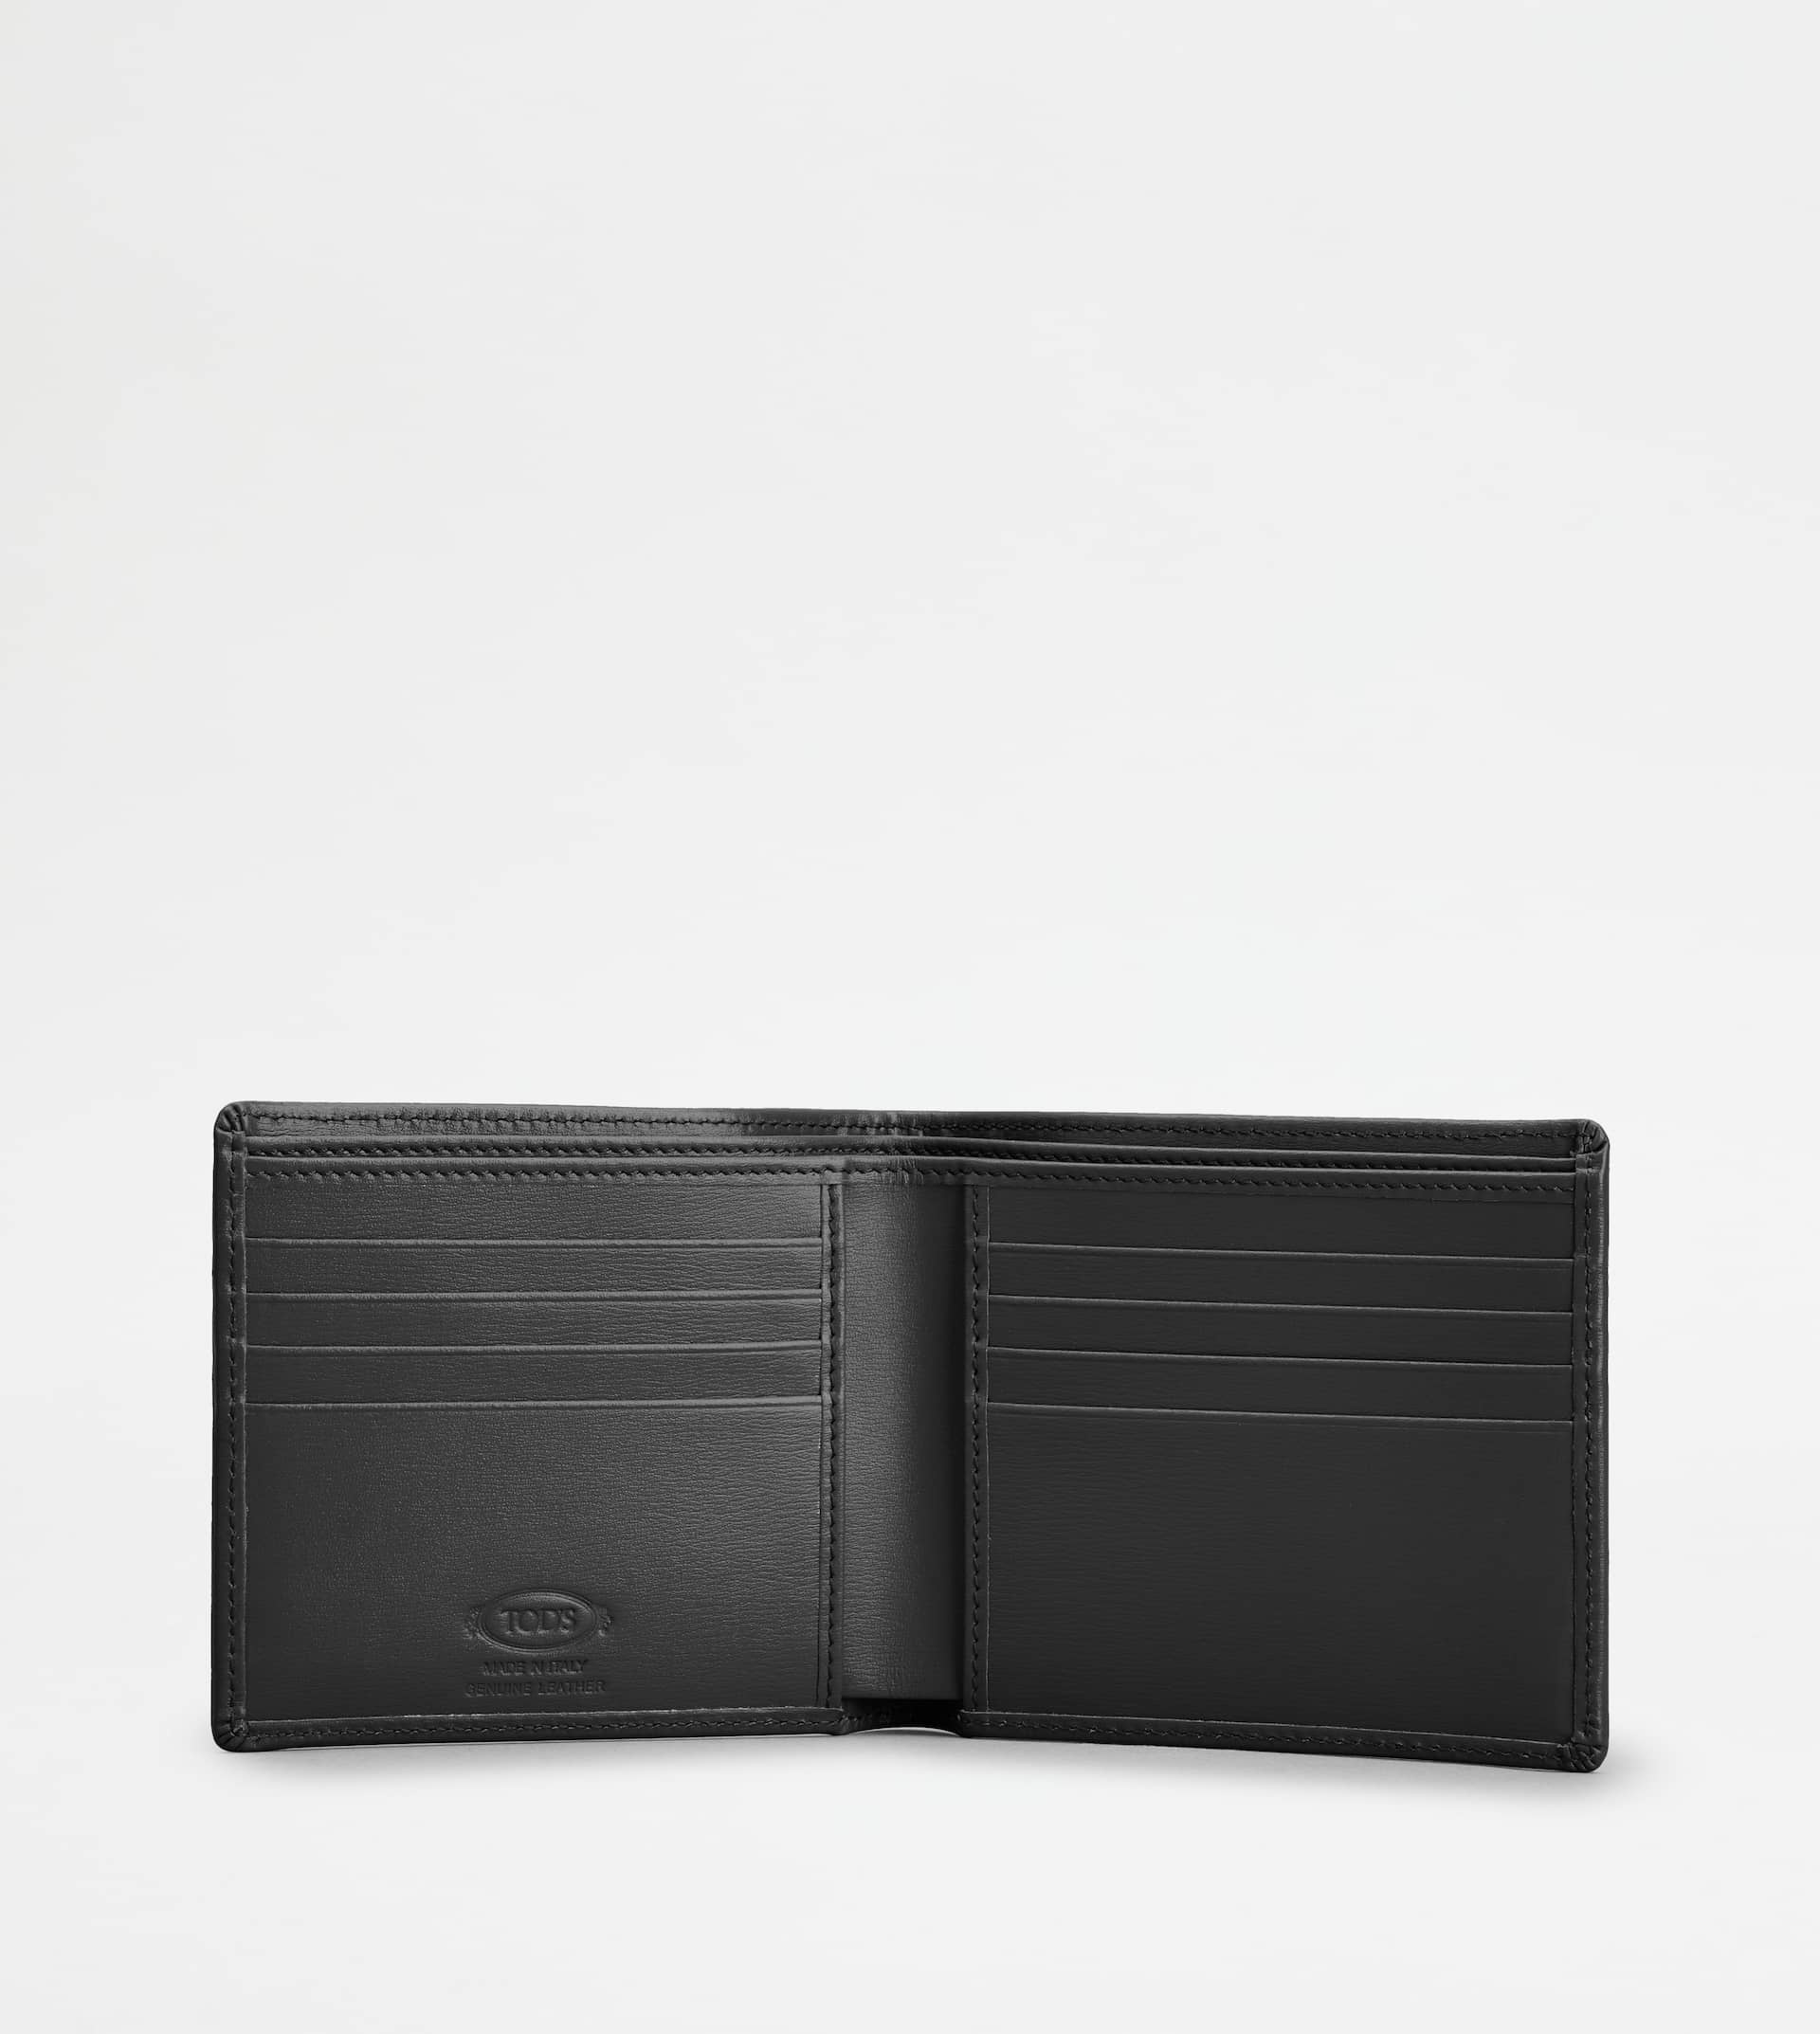 TOD'S WALLET IN LEATHER - BLACK - 2